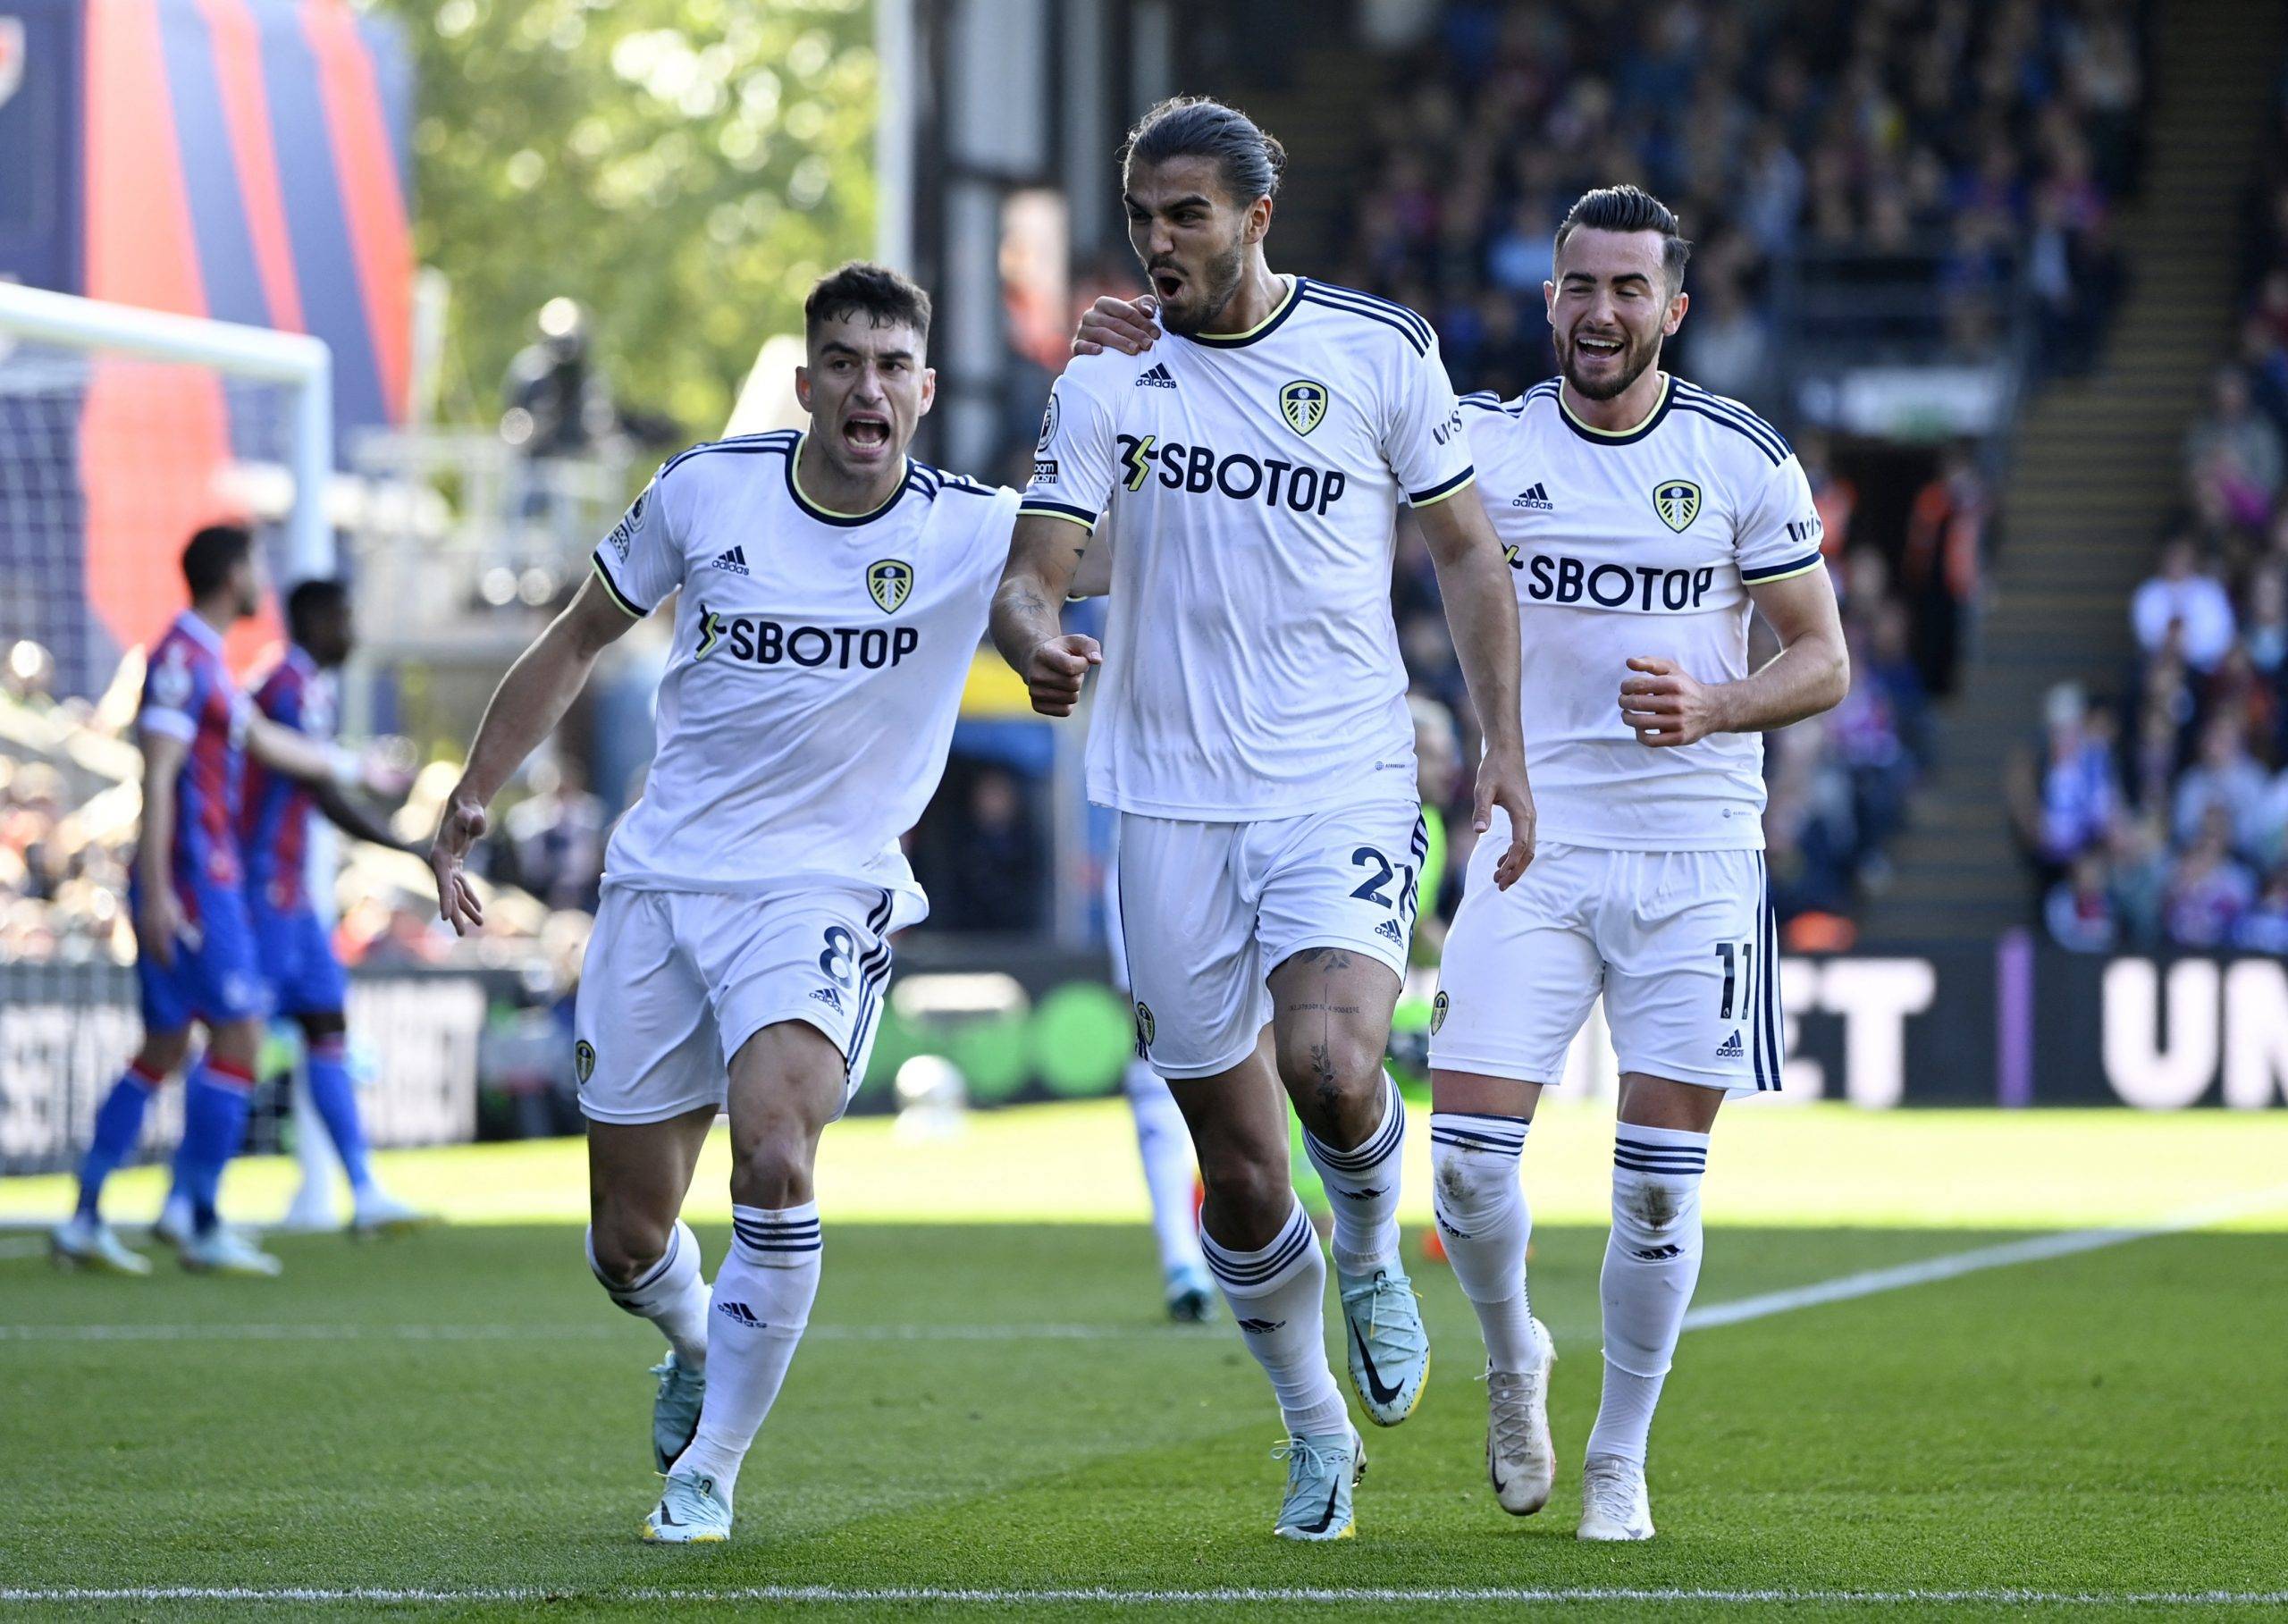 Leeds: Bryn Law appears to confirm Pascal Struijk contract - Leeds United News